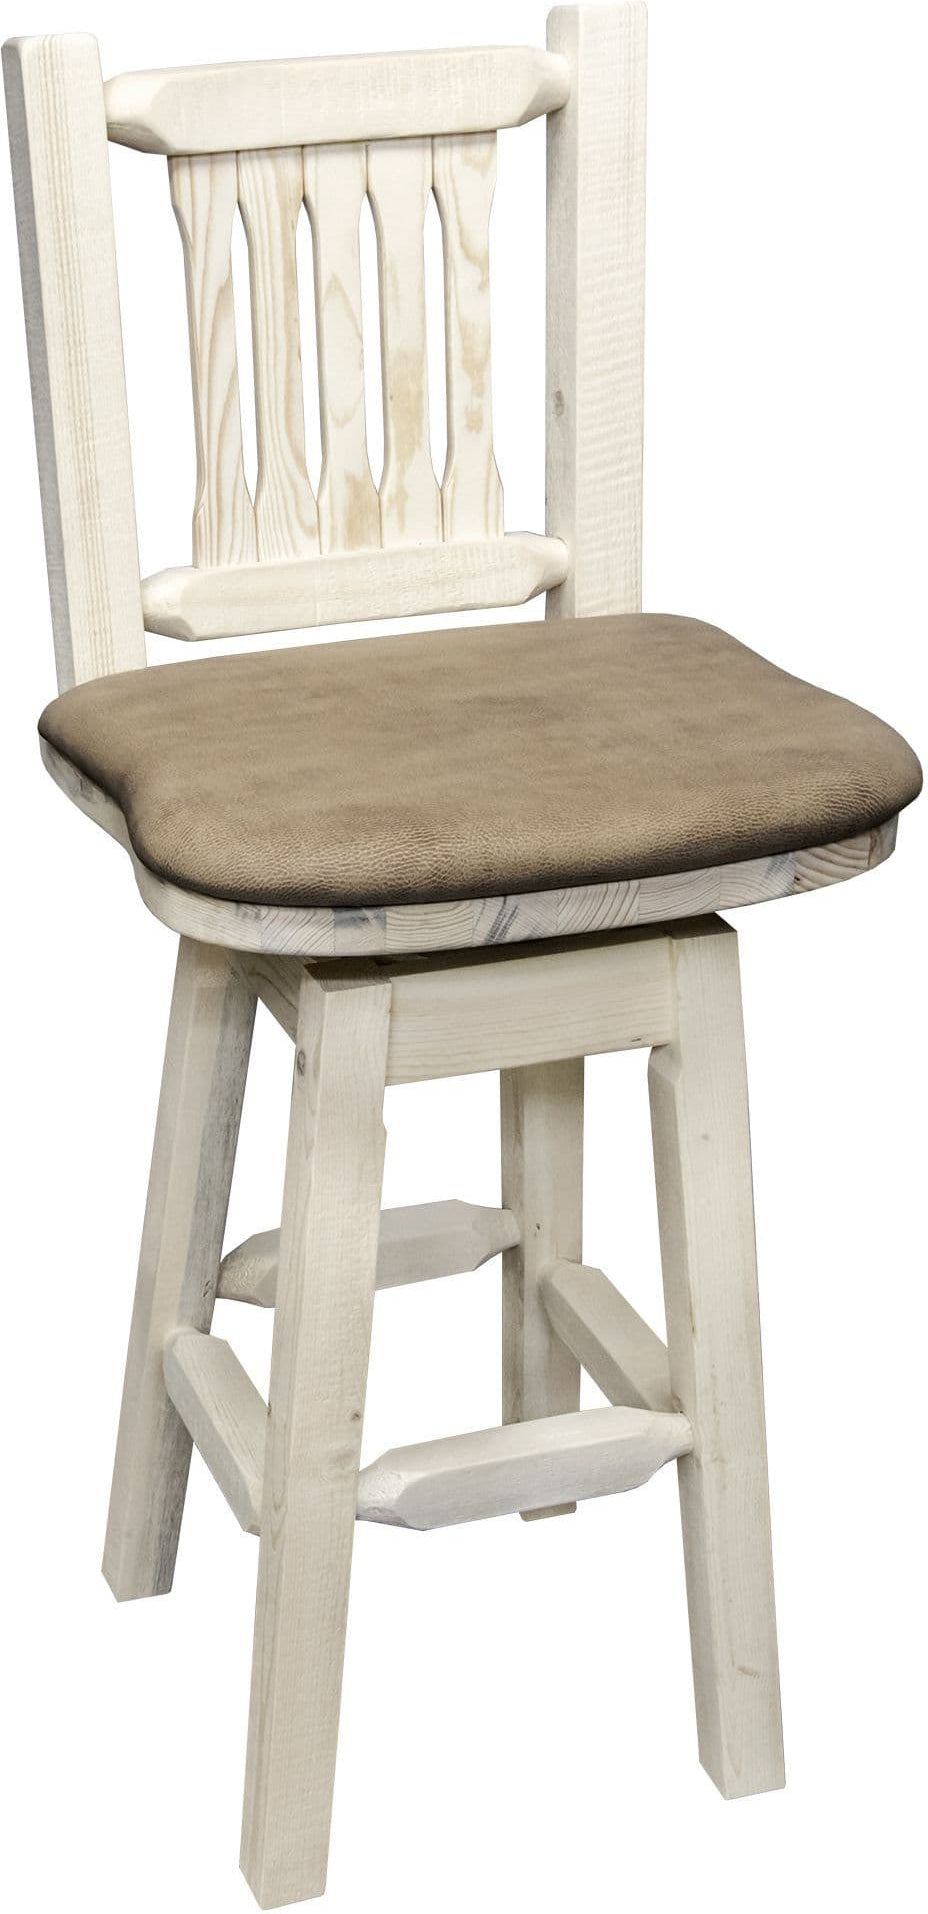 Montana Woodworks Homestead Collection Barstool with Back/Swivel/Upholstered Seat-Rustic Furniture Marketplace